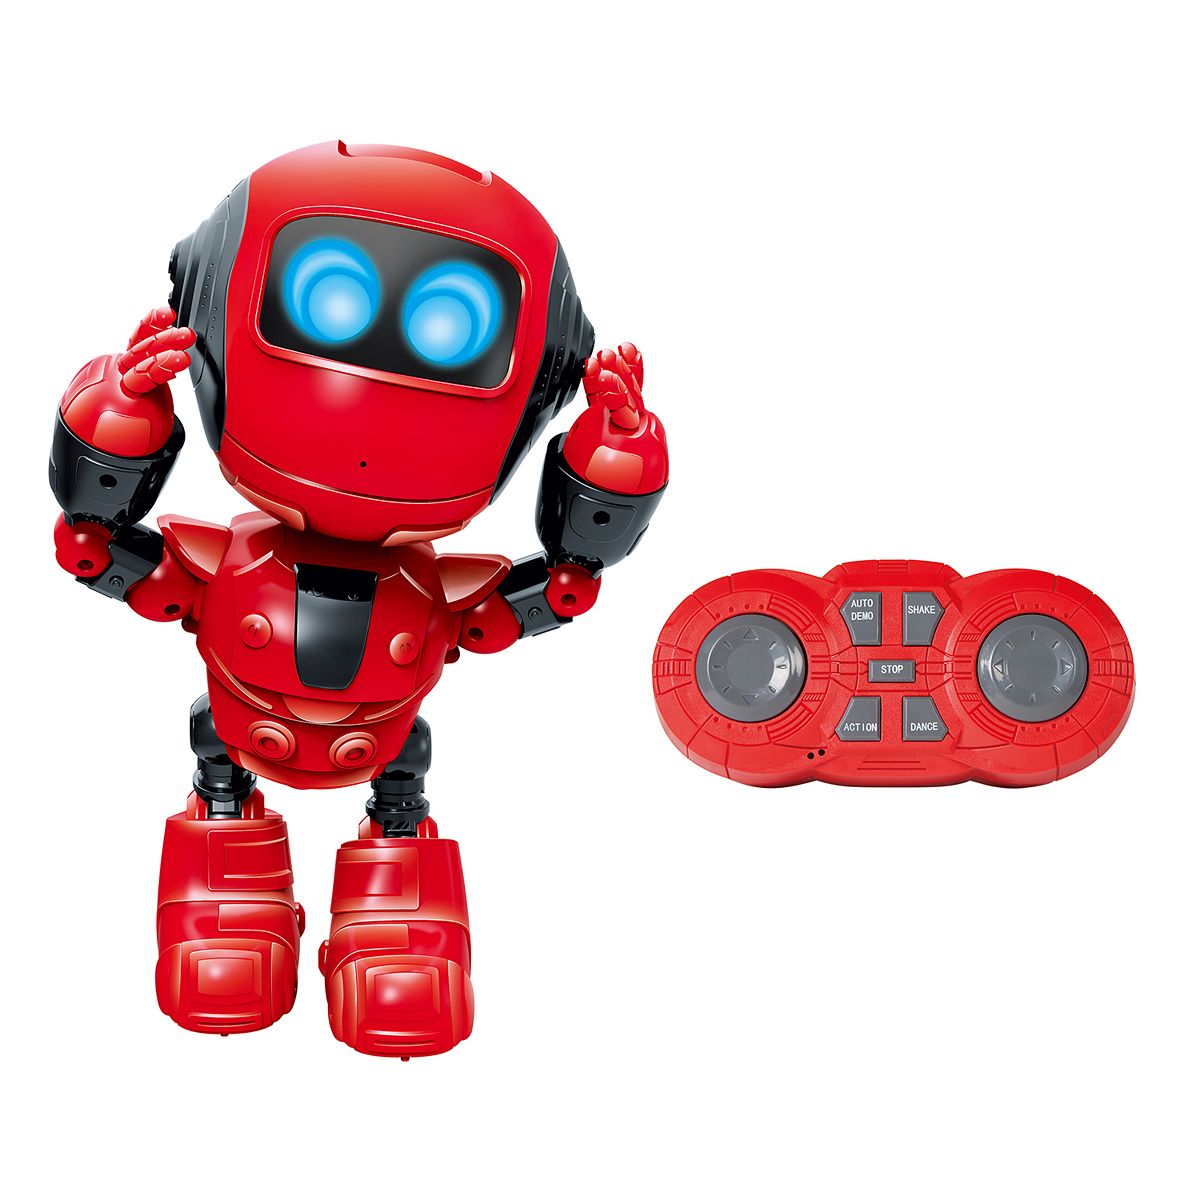  Ruko 1088 Smart Robots for Kids, Large Programmable Interactive  RC Robot with Voice Control, APP Control, Present for 4 5 6 7 8 9 Years Old  Kids Boys and Girls : Toys & Games